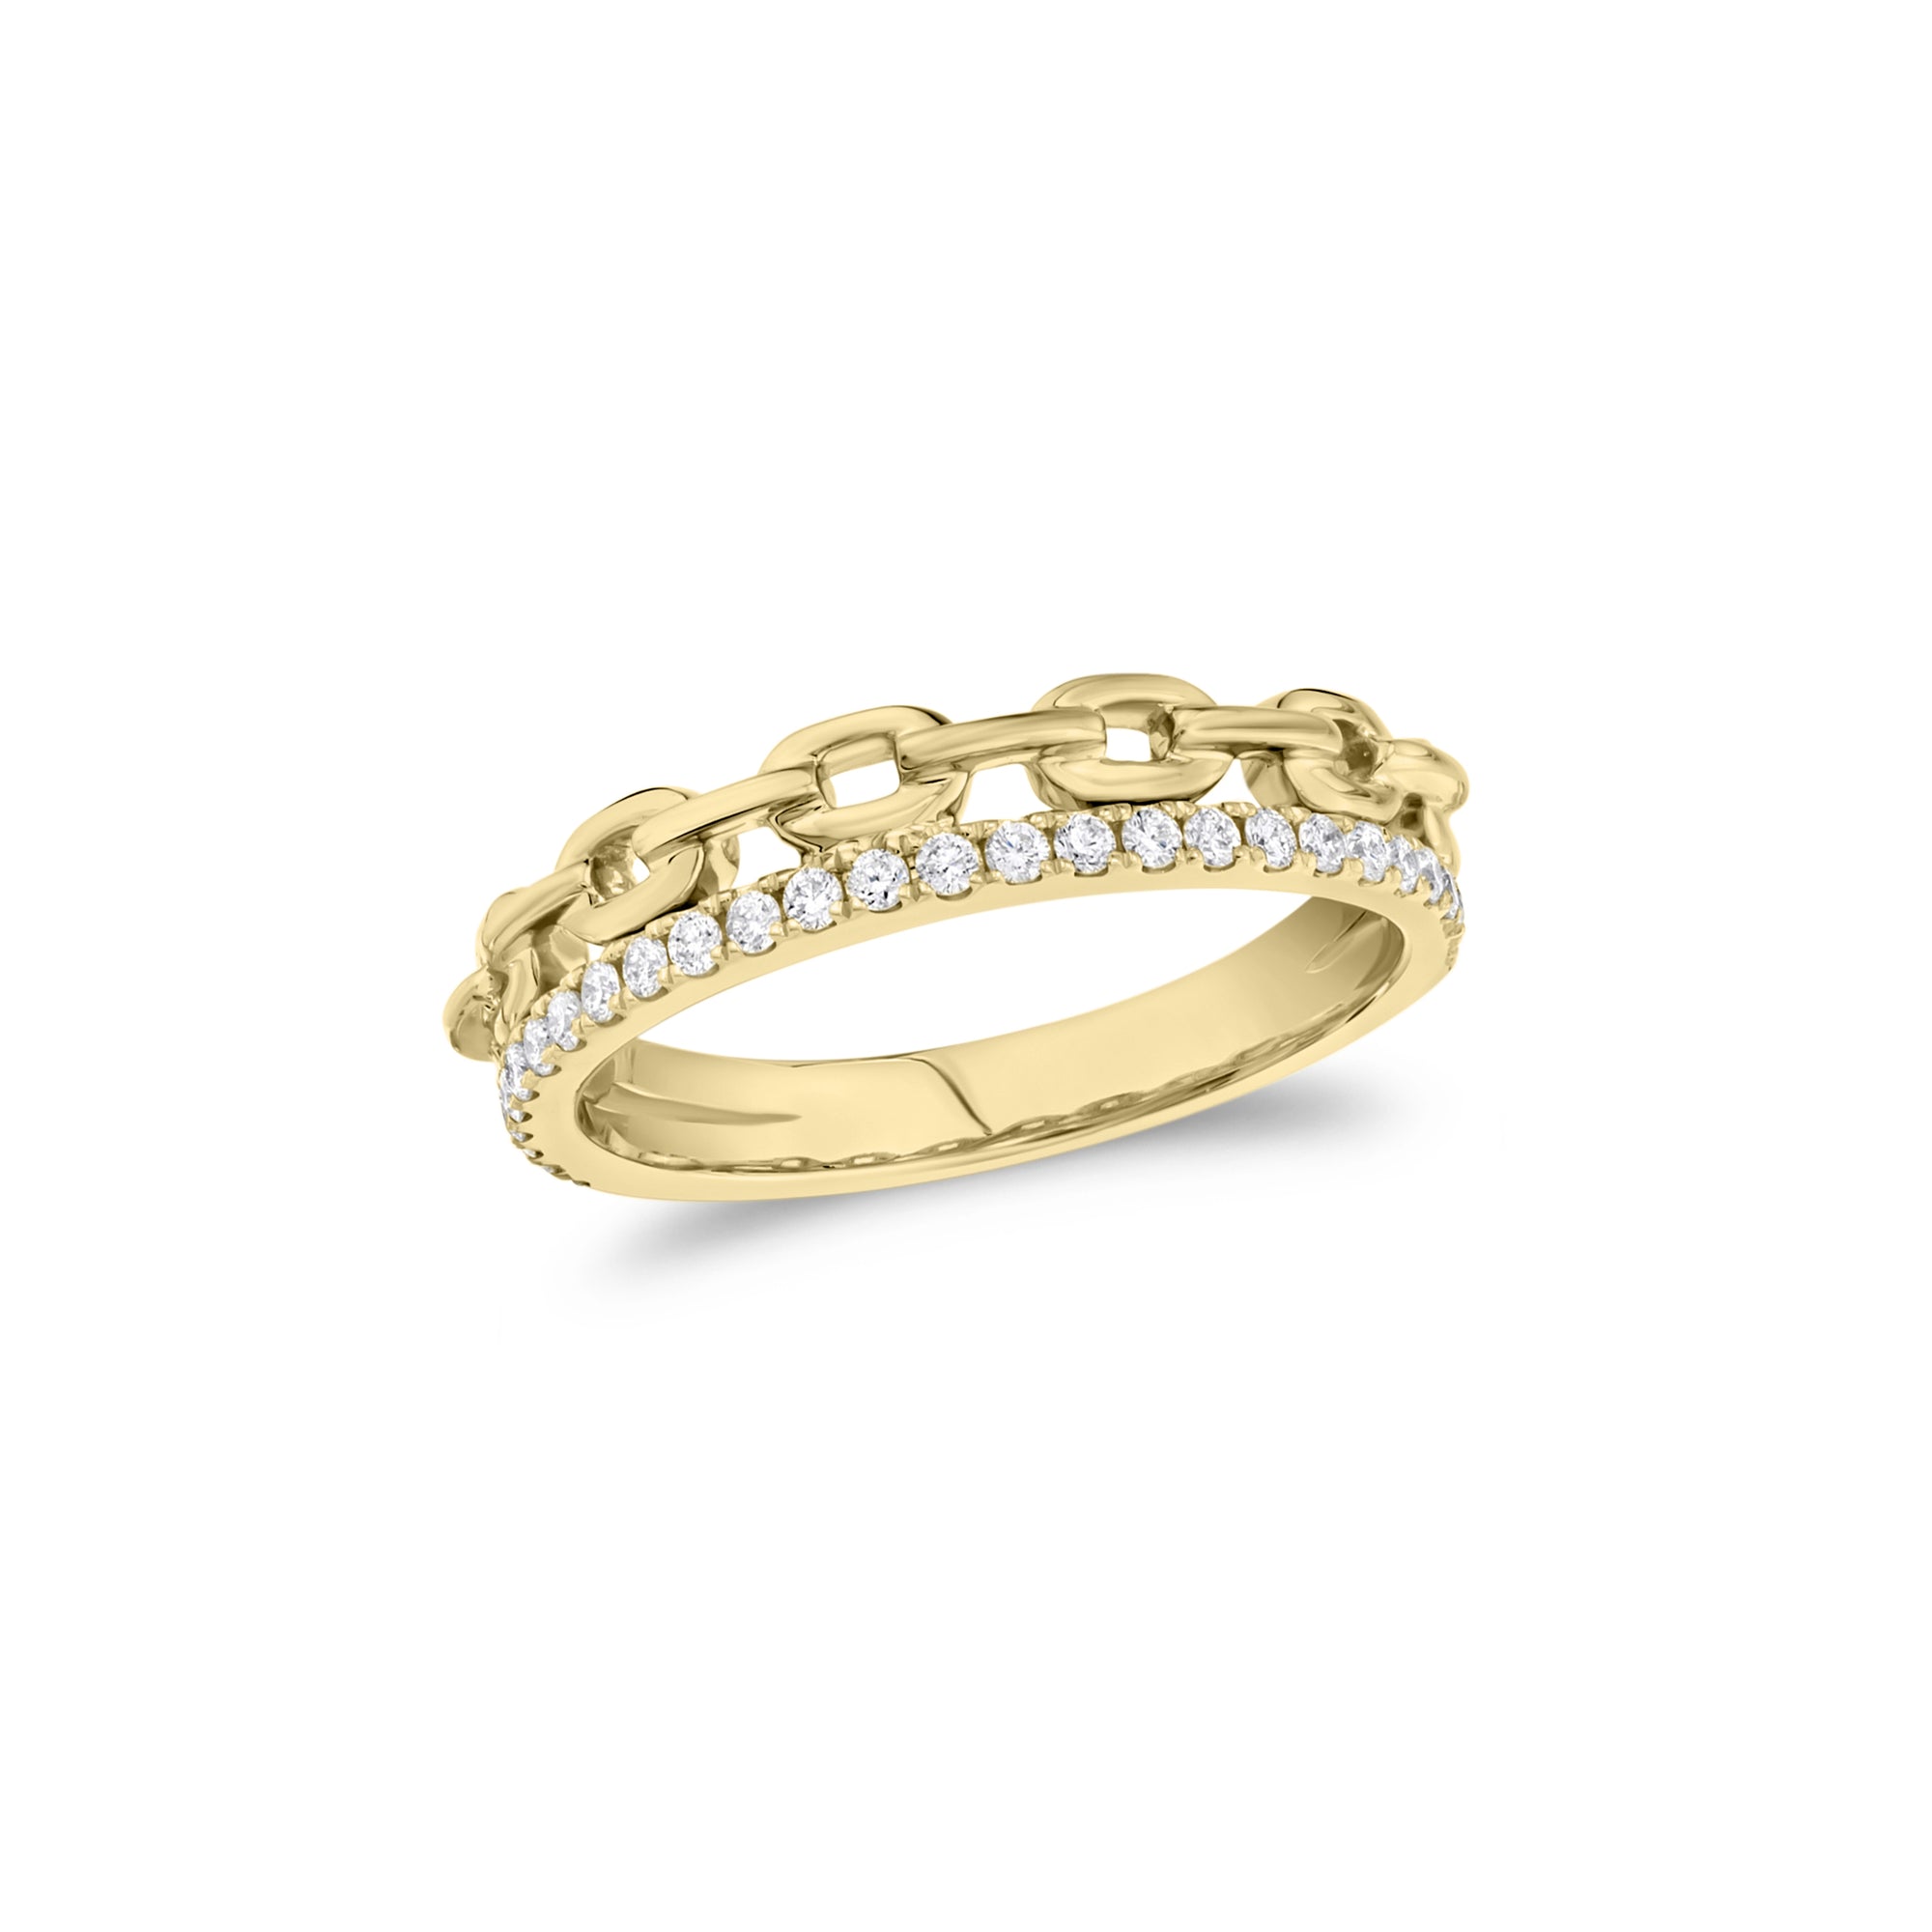 Diamond & Gold Cable Chain Stackable Ring  - 14K gold  - 0.25 cts round diamonds